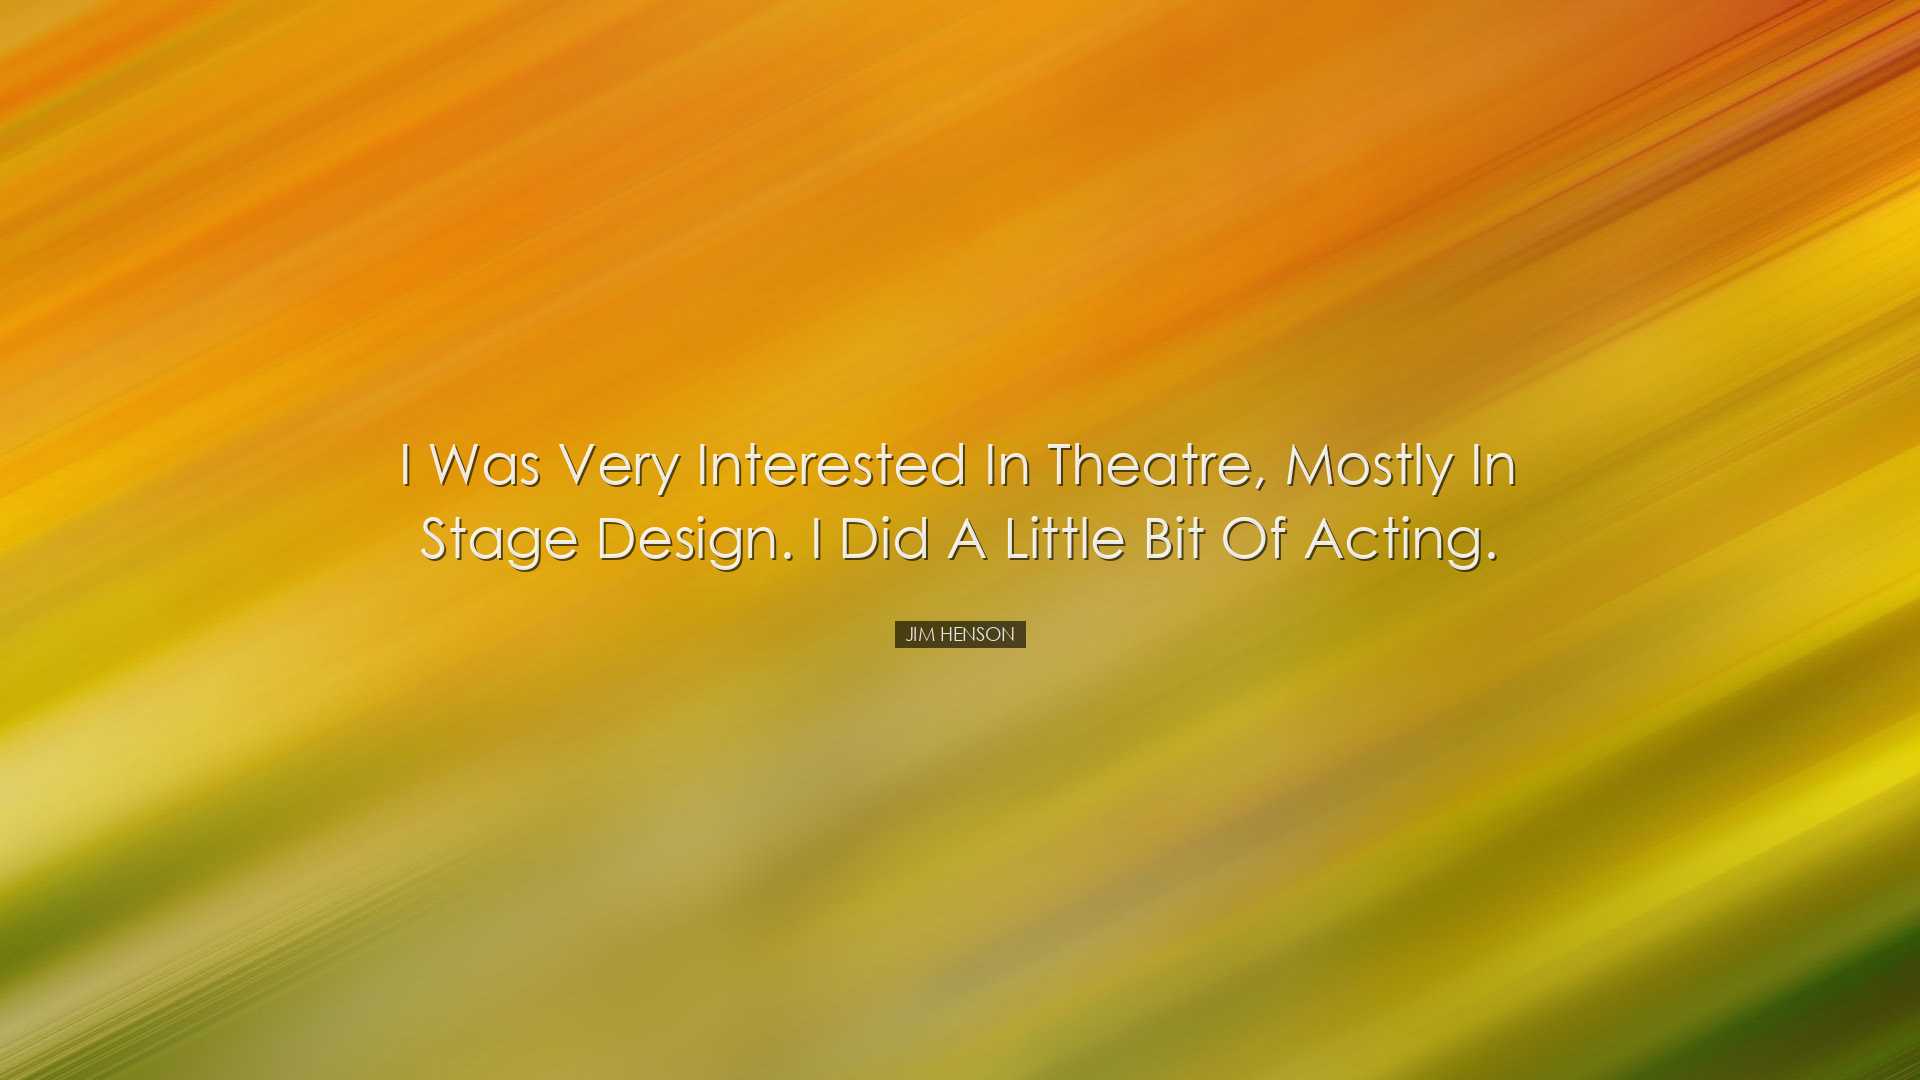 I was very interested in theatre, mostly in stage design. I did a